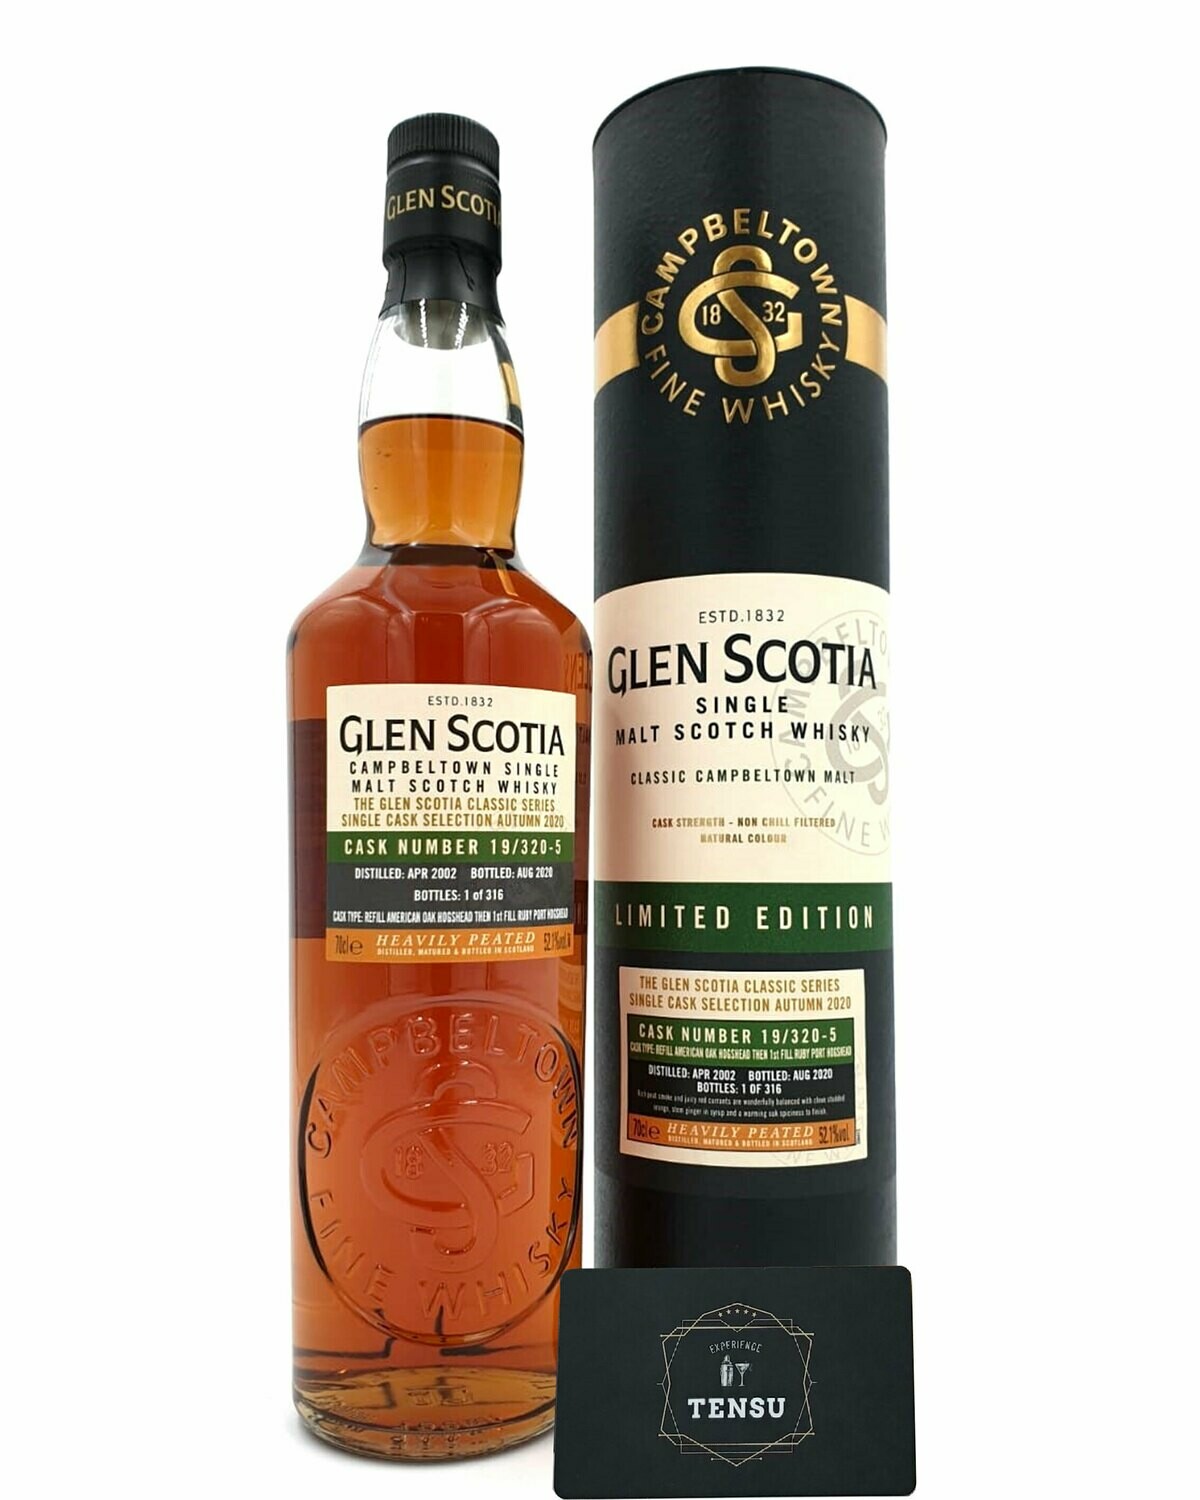 Glen Scotia 18 Years Old (2002-2020) 52.1 "Classic Series - OB"